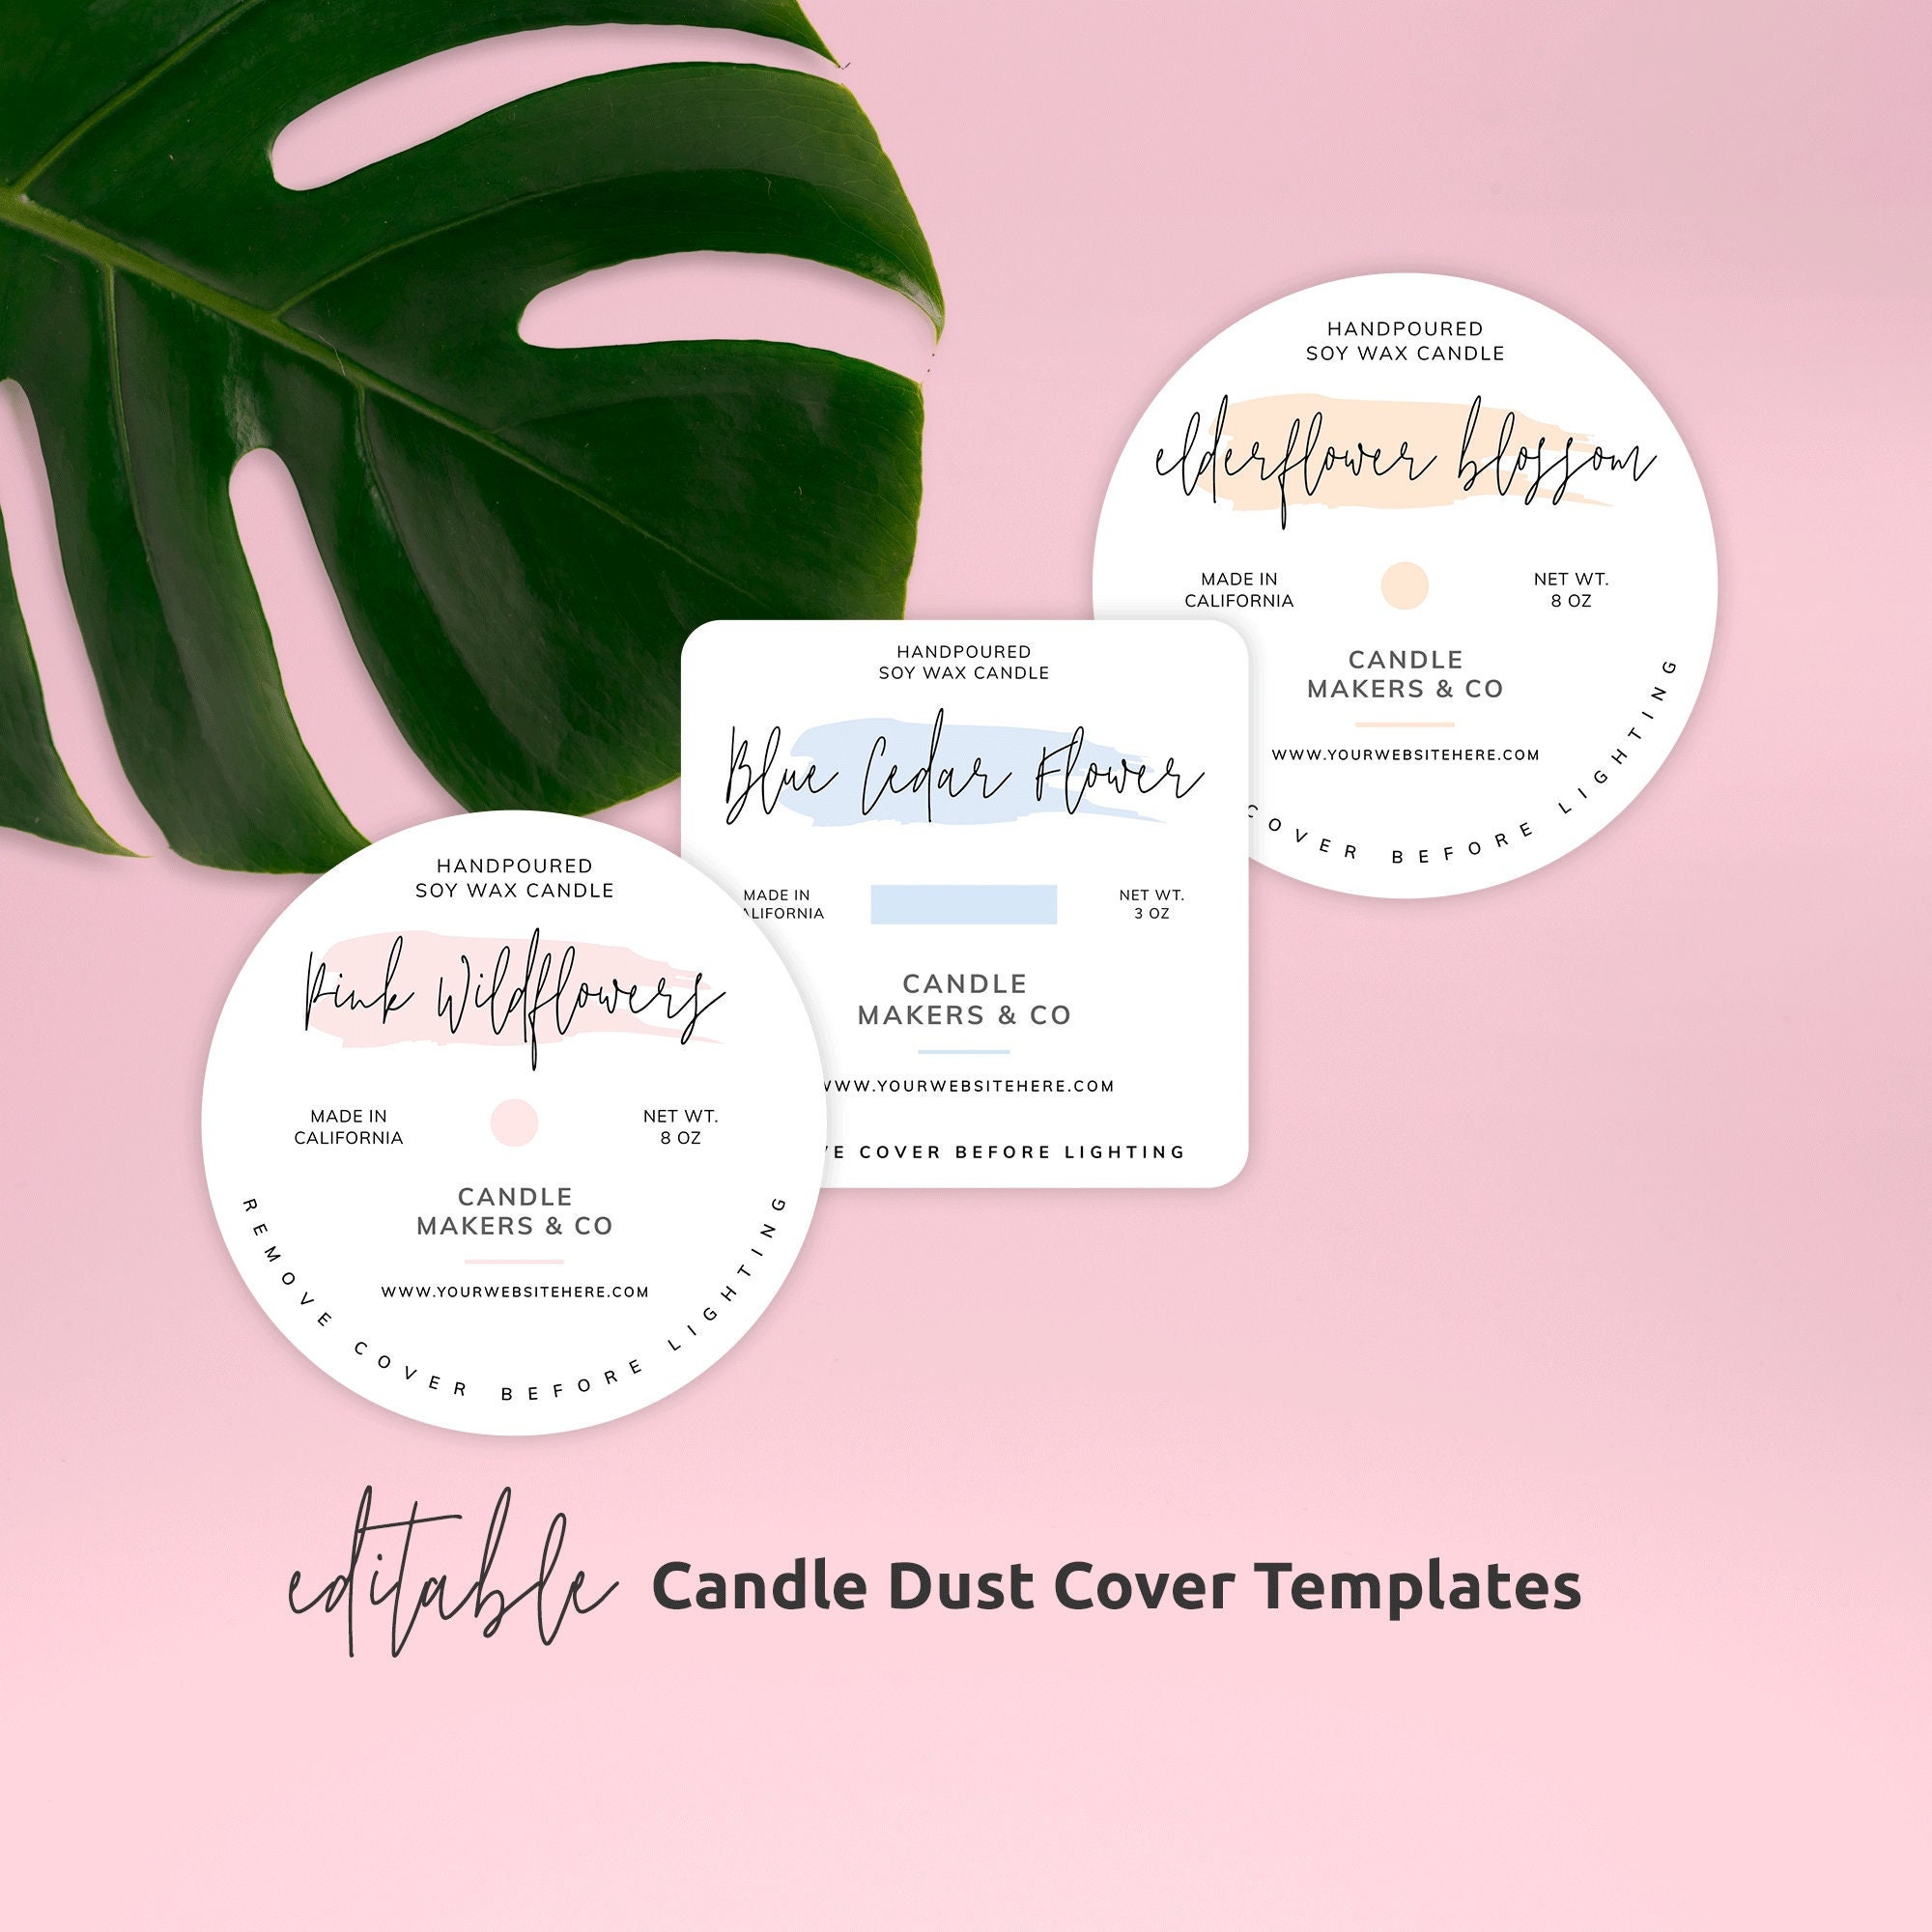 Basic Candle Dust Cover Template, Boho Editable Candle Dust Cover